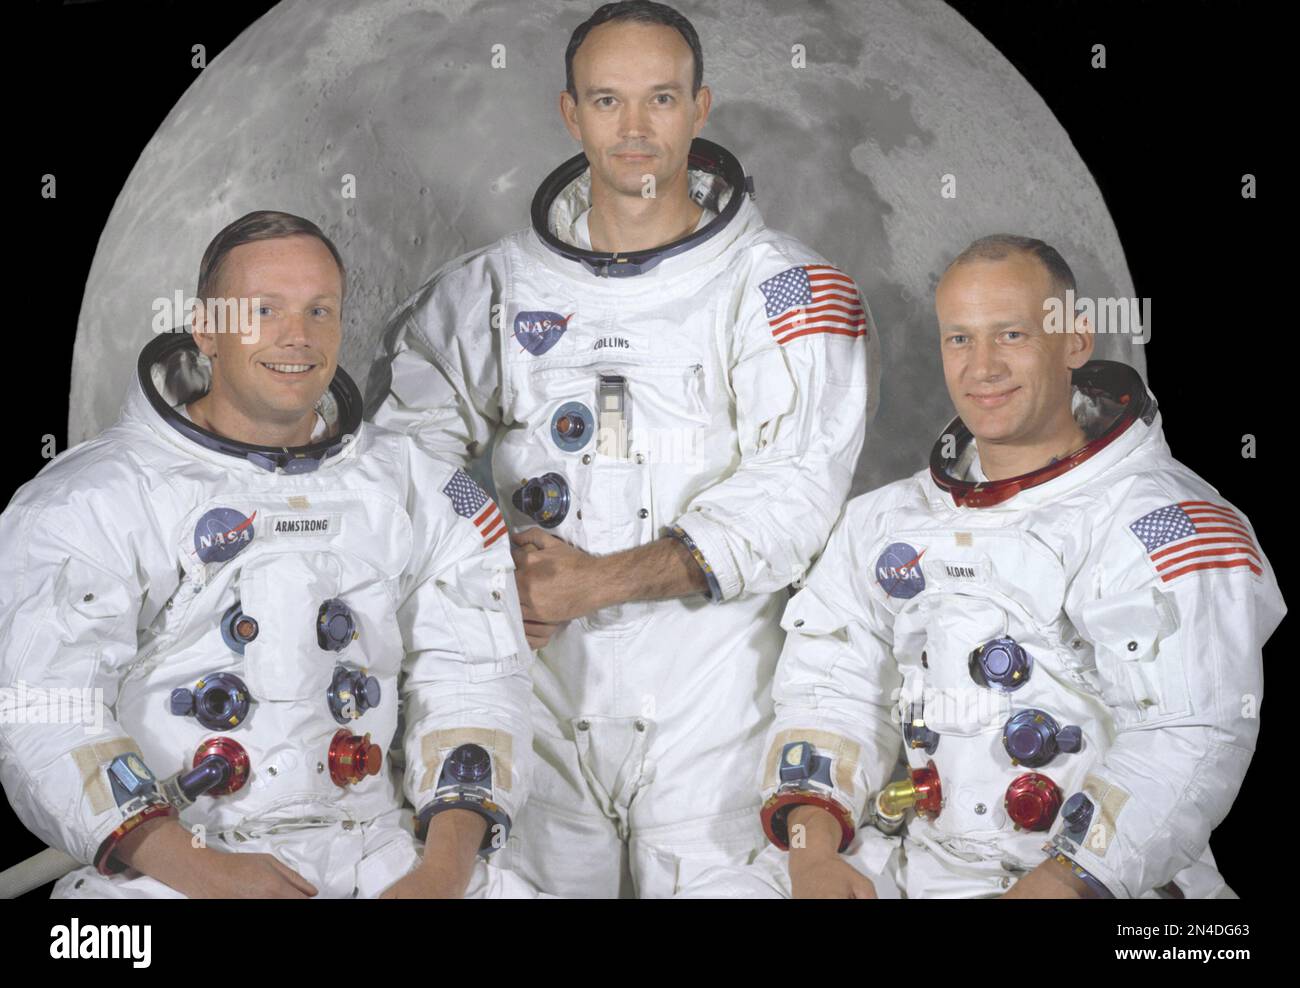 Portrait of the prime crew of the Apollo 11 lunar landing mission. From left to right they are: Commander, Neil A. Armstrong, Command Module Pilot, Michael Collins, and Lunar Module Pilot, Edwin E. Aldrin Jr. On July 20th 1969 at 4:18 PM, EDT the Lunar Module 'Eagle' landed in a region of the Moon called the Mare Tranquillitatis, also known as the Sea of Tranquillity. After securing his spacecraft, Armstrong radioed back to earth: 'Houston, Tranquility Base here, the Eagle has landed'. At 10:56 p.m. that same evening and witnessed by a worldwide television audience, Neil Armstrong stepped off Stock Photo